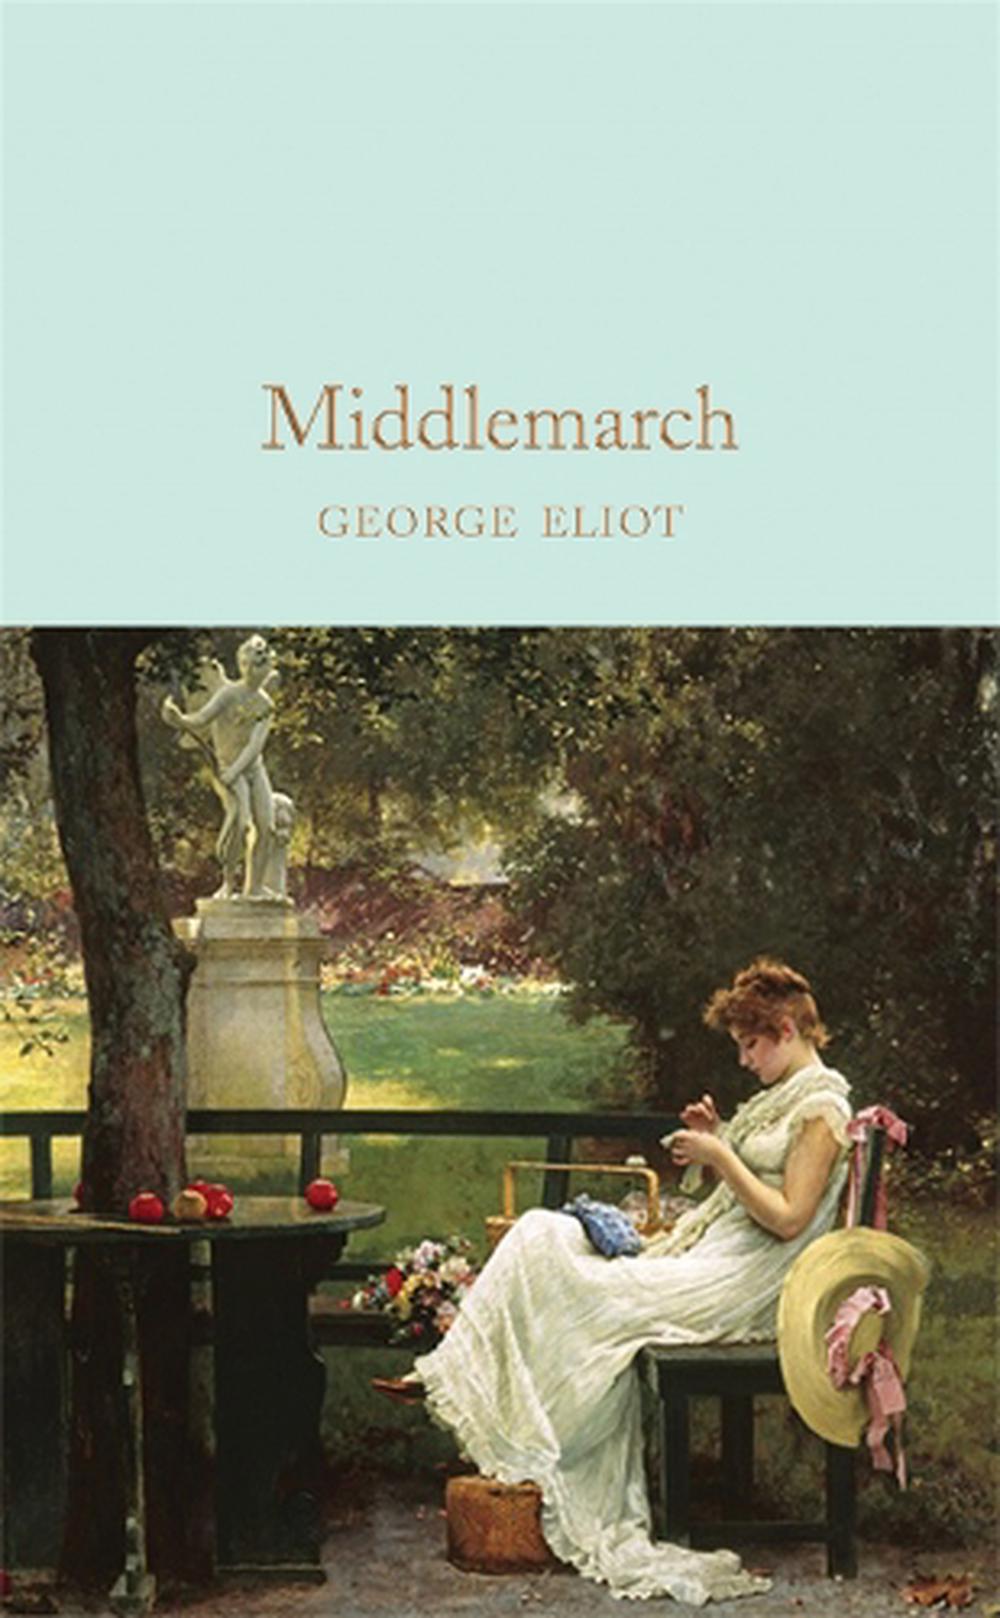 Middlemarch download the new version for mac